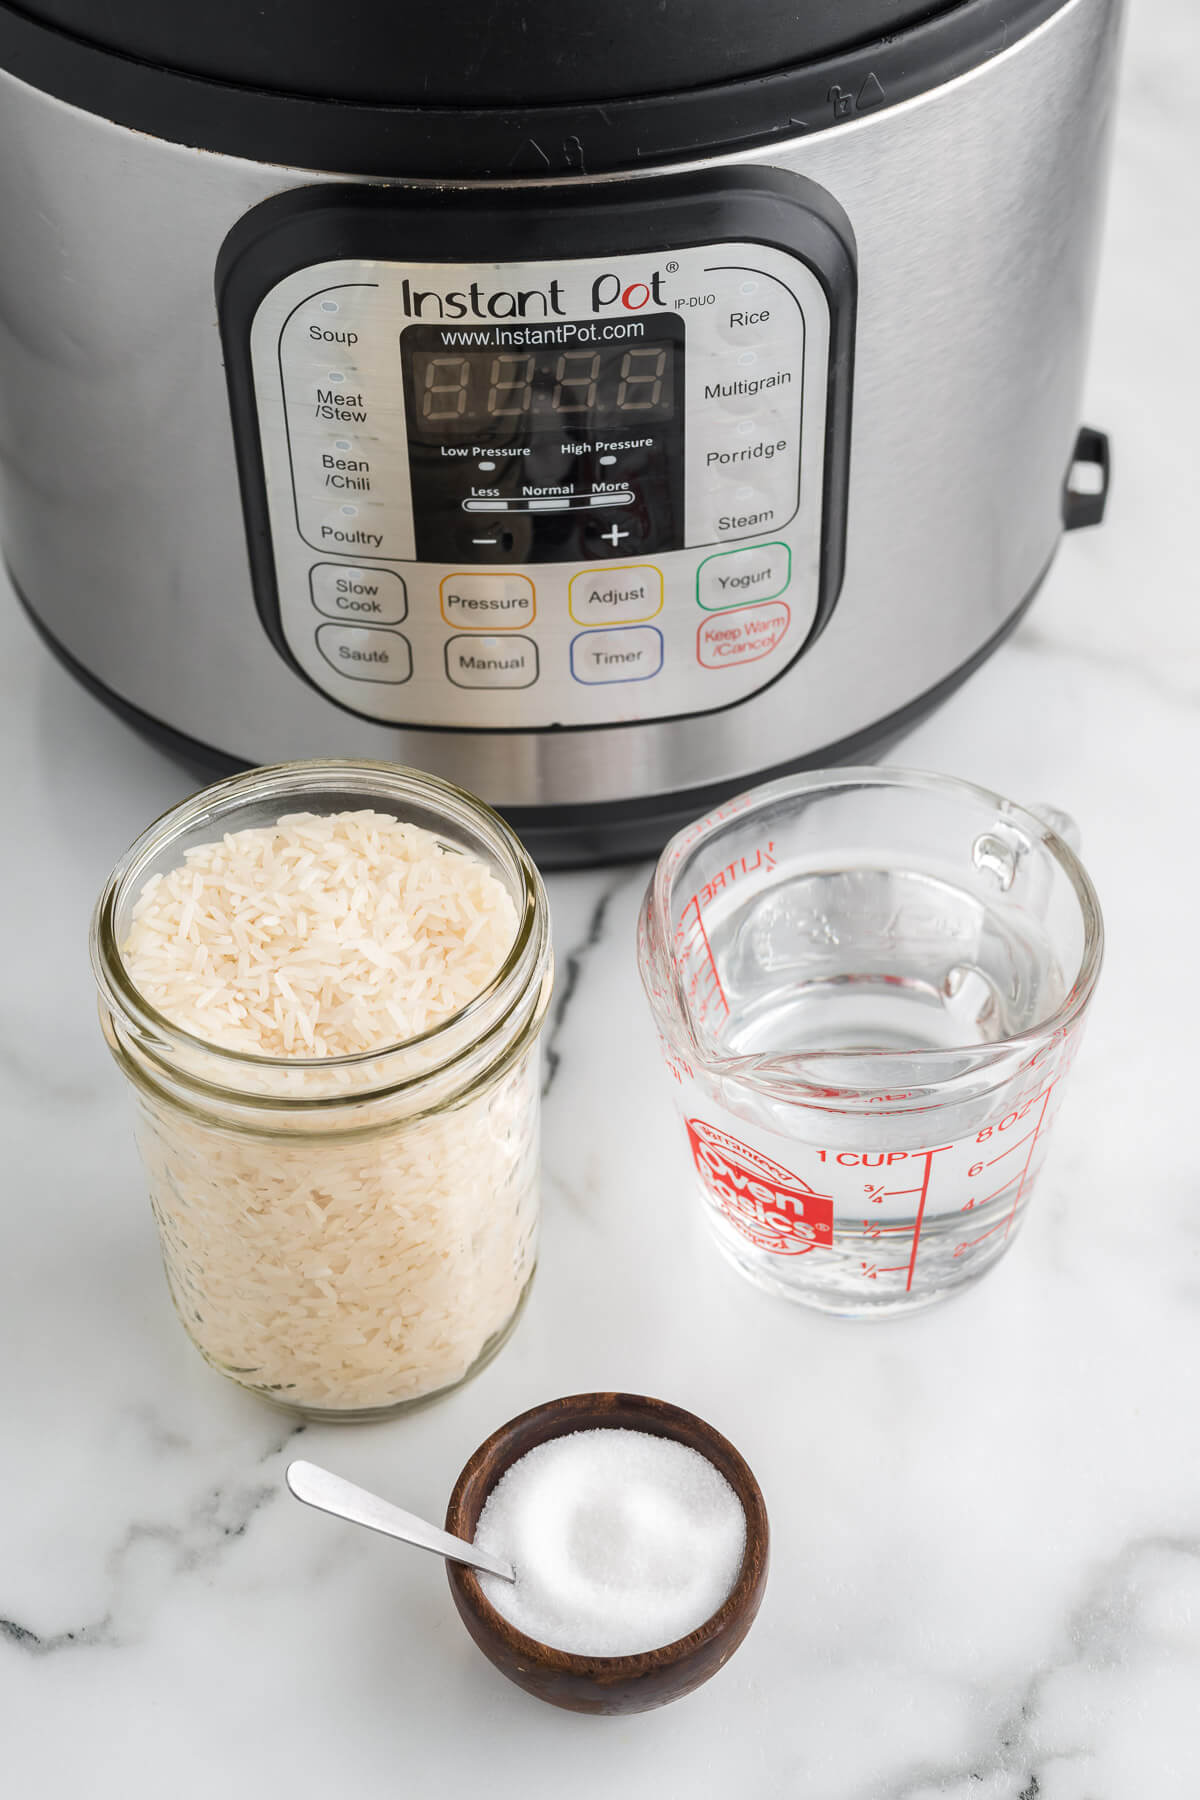 ingredients for instant pot rice on a kitchen counter.